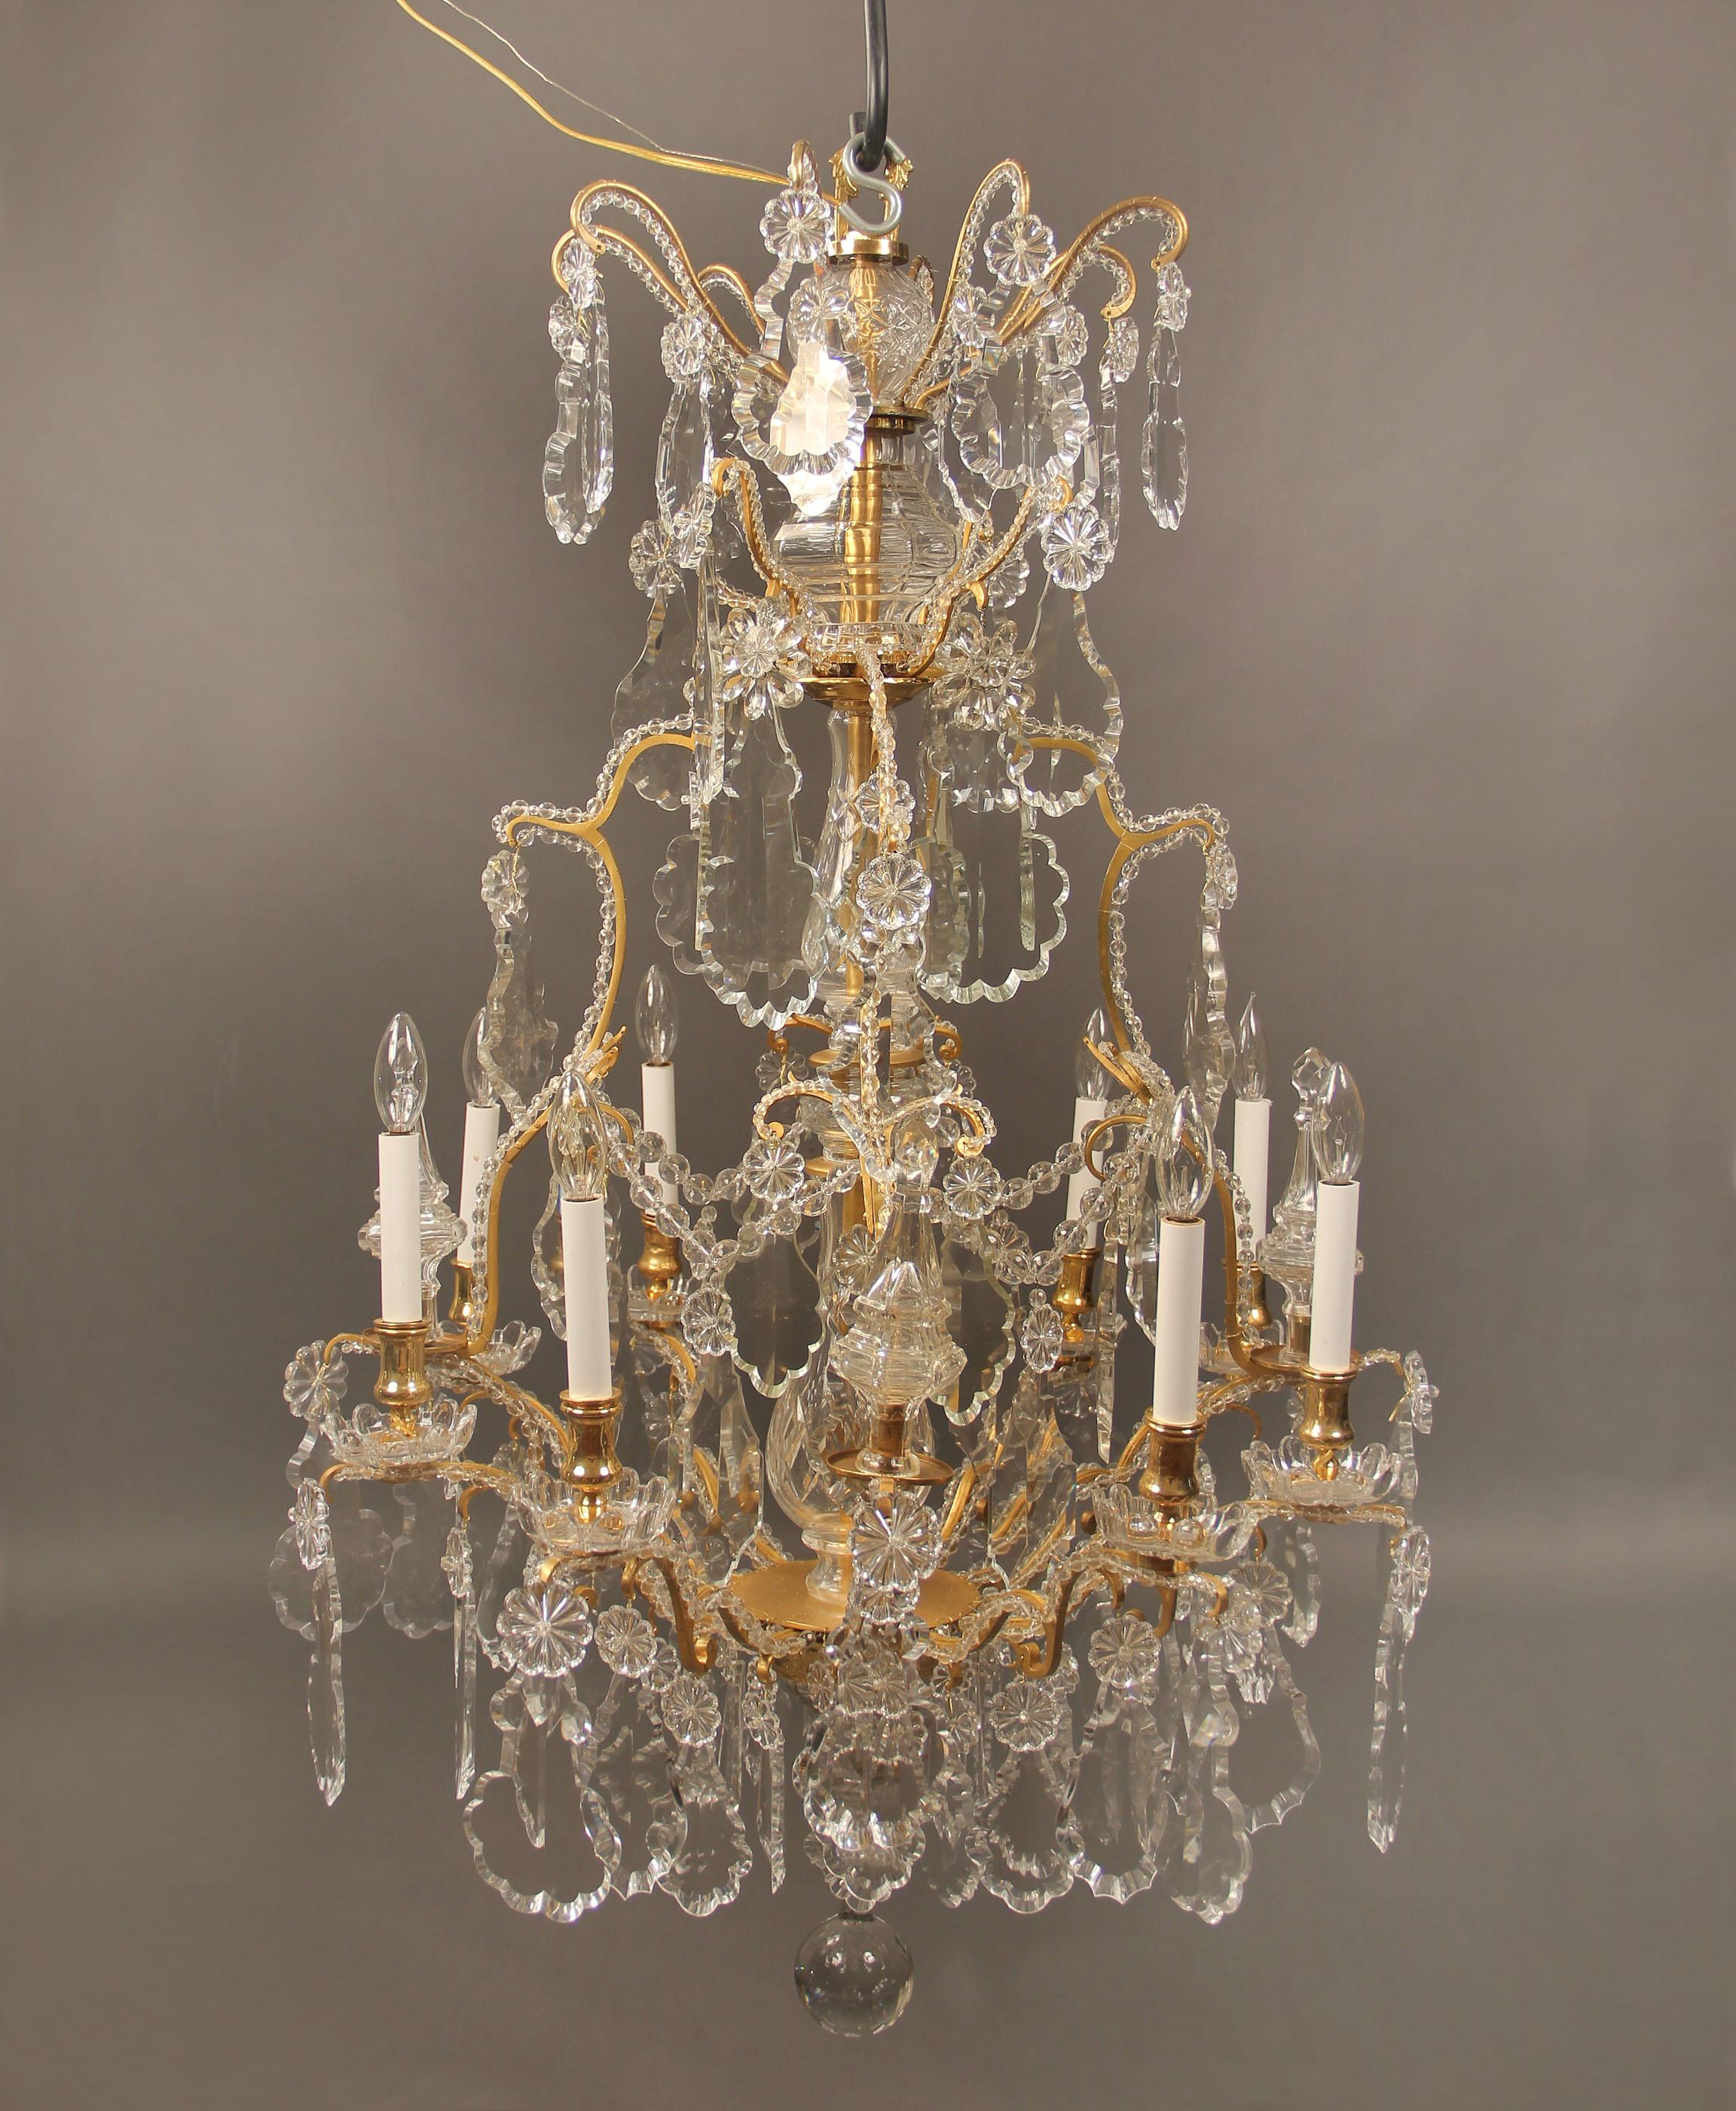 A beautiful late 19th century gilt bronze and crystal eight-light chandelier.

Multi-faceted and shaped crystal, cut crystal central column with beaded arms and swags, four spears and eight perimeter lights.